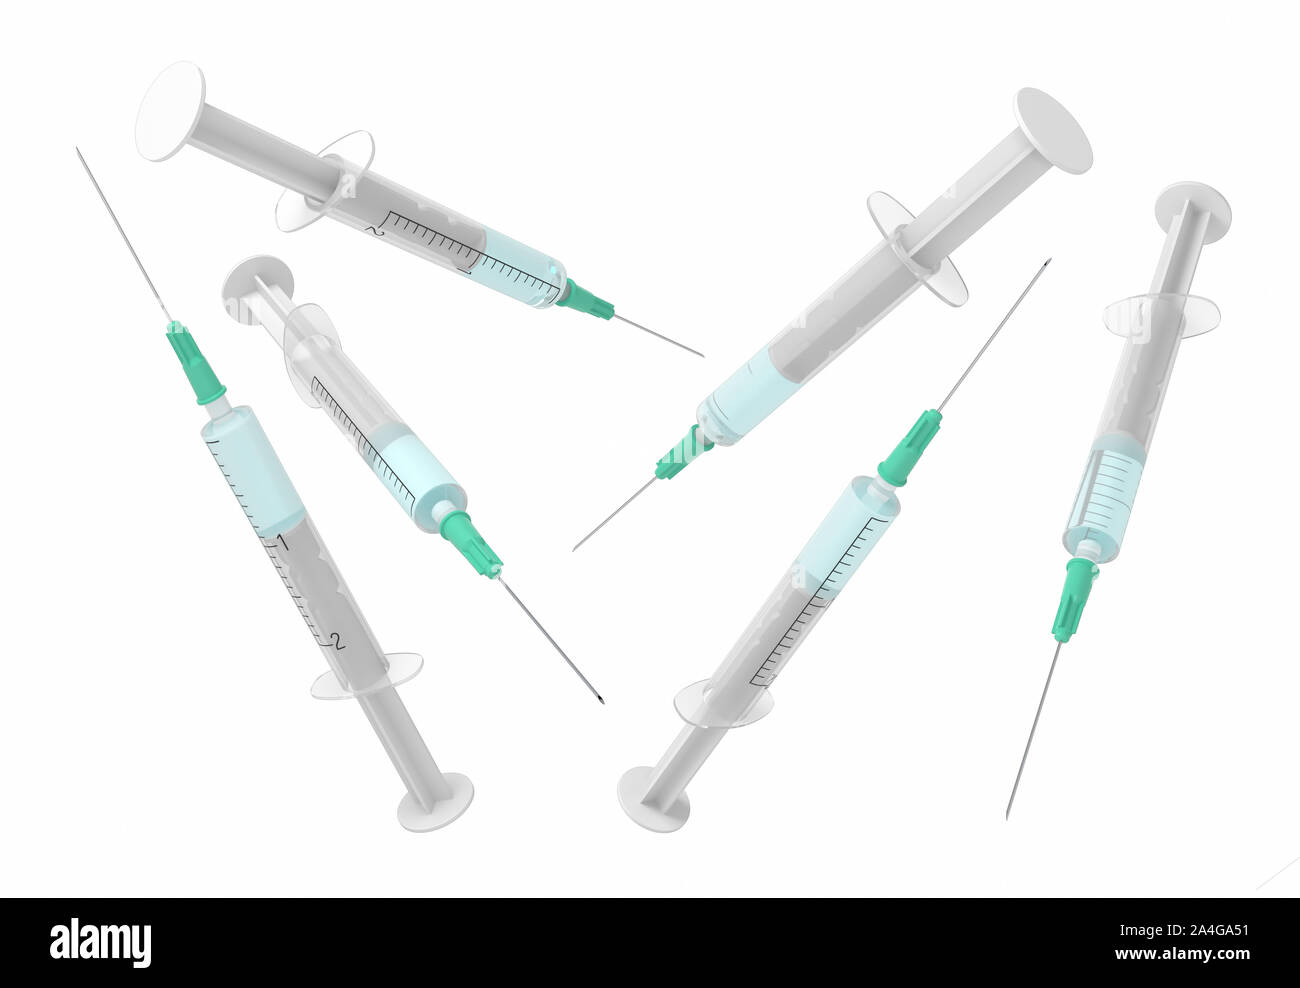 3d rendering set of safety medical syringes with needles isolated on white background. Medicine and health. Healthcare industry. Medical instruments a Stock Photo